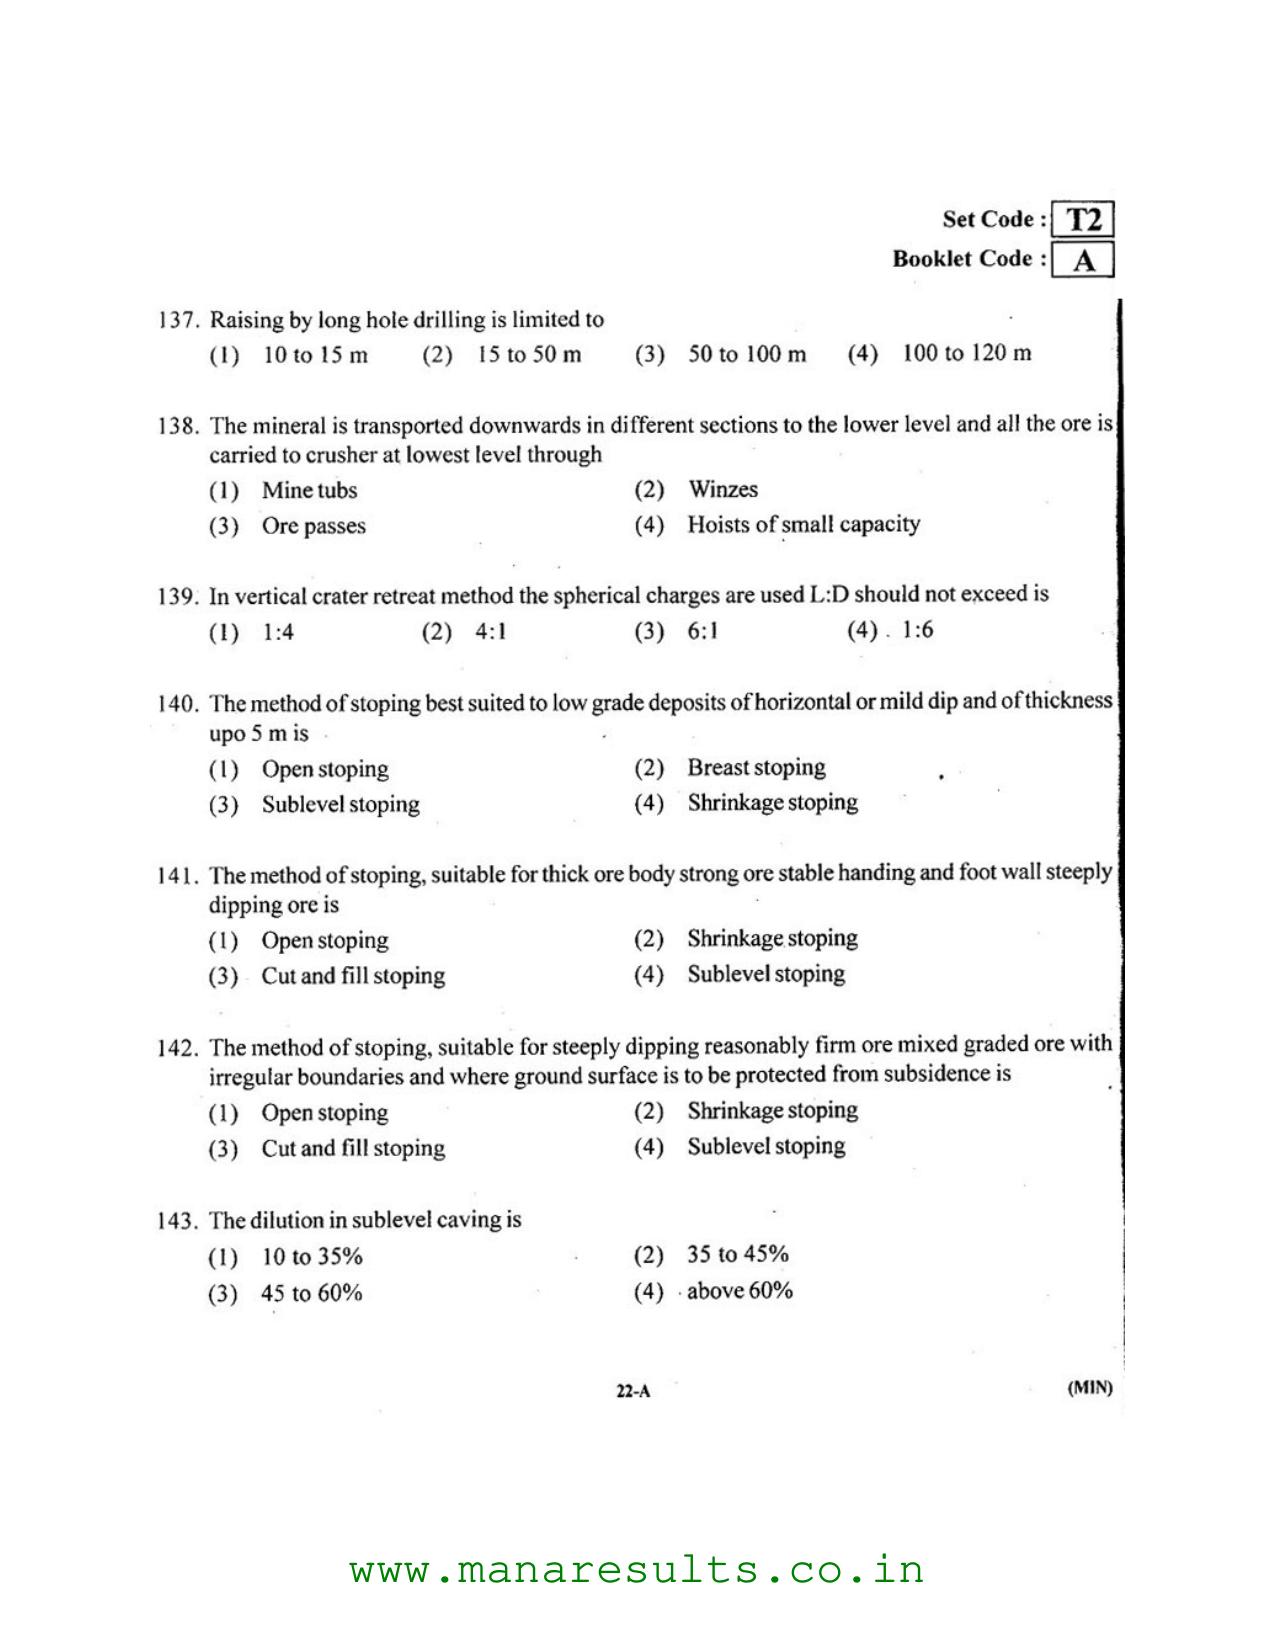 AP ECET 2016 Mining Engineering Old Previous Question Papers - Page 21